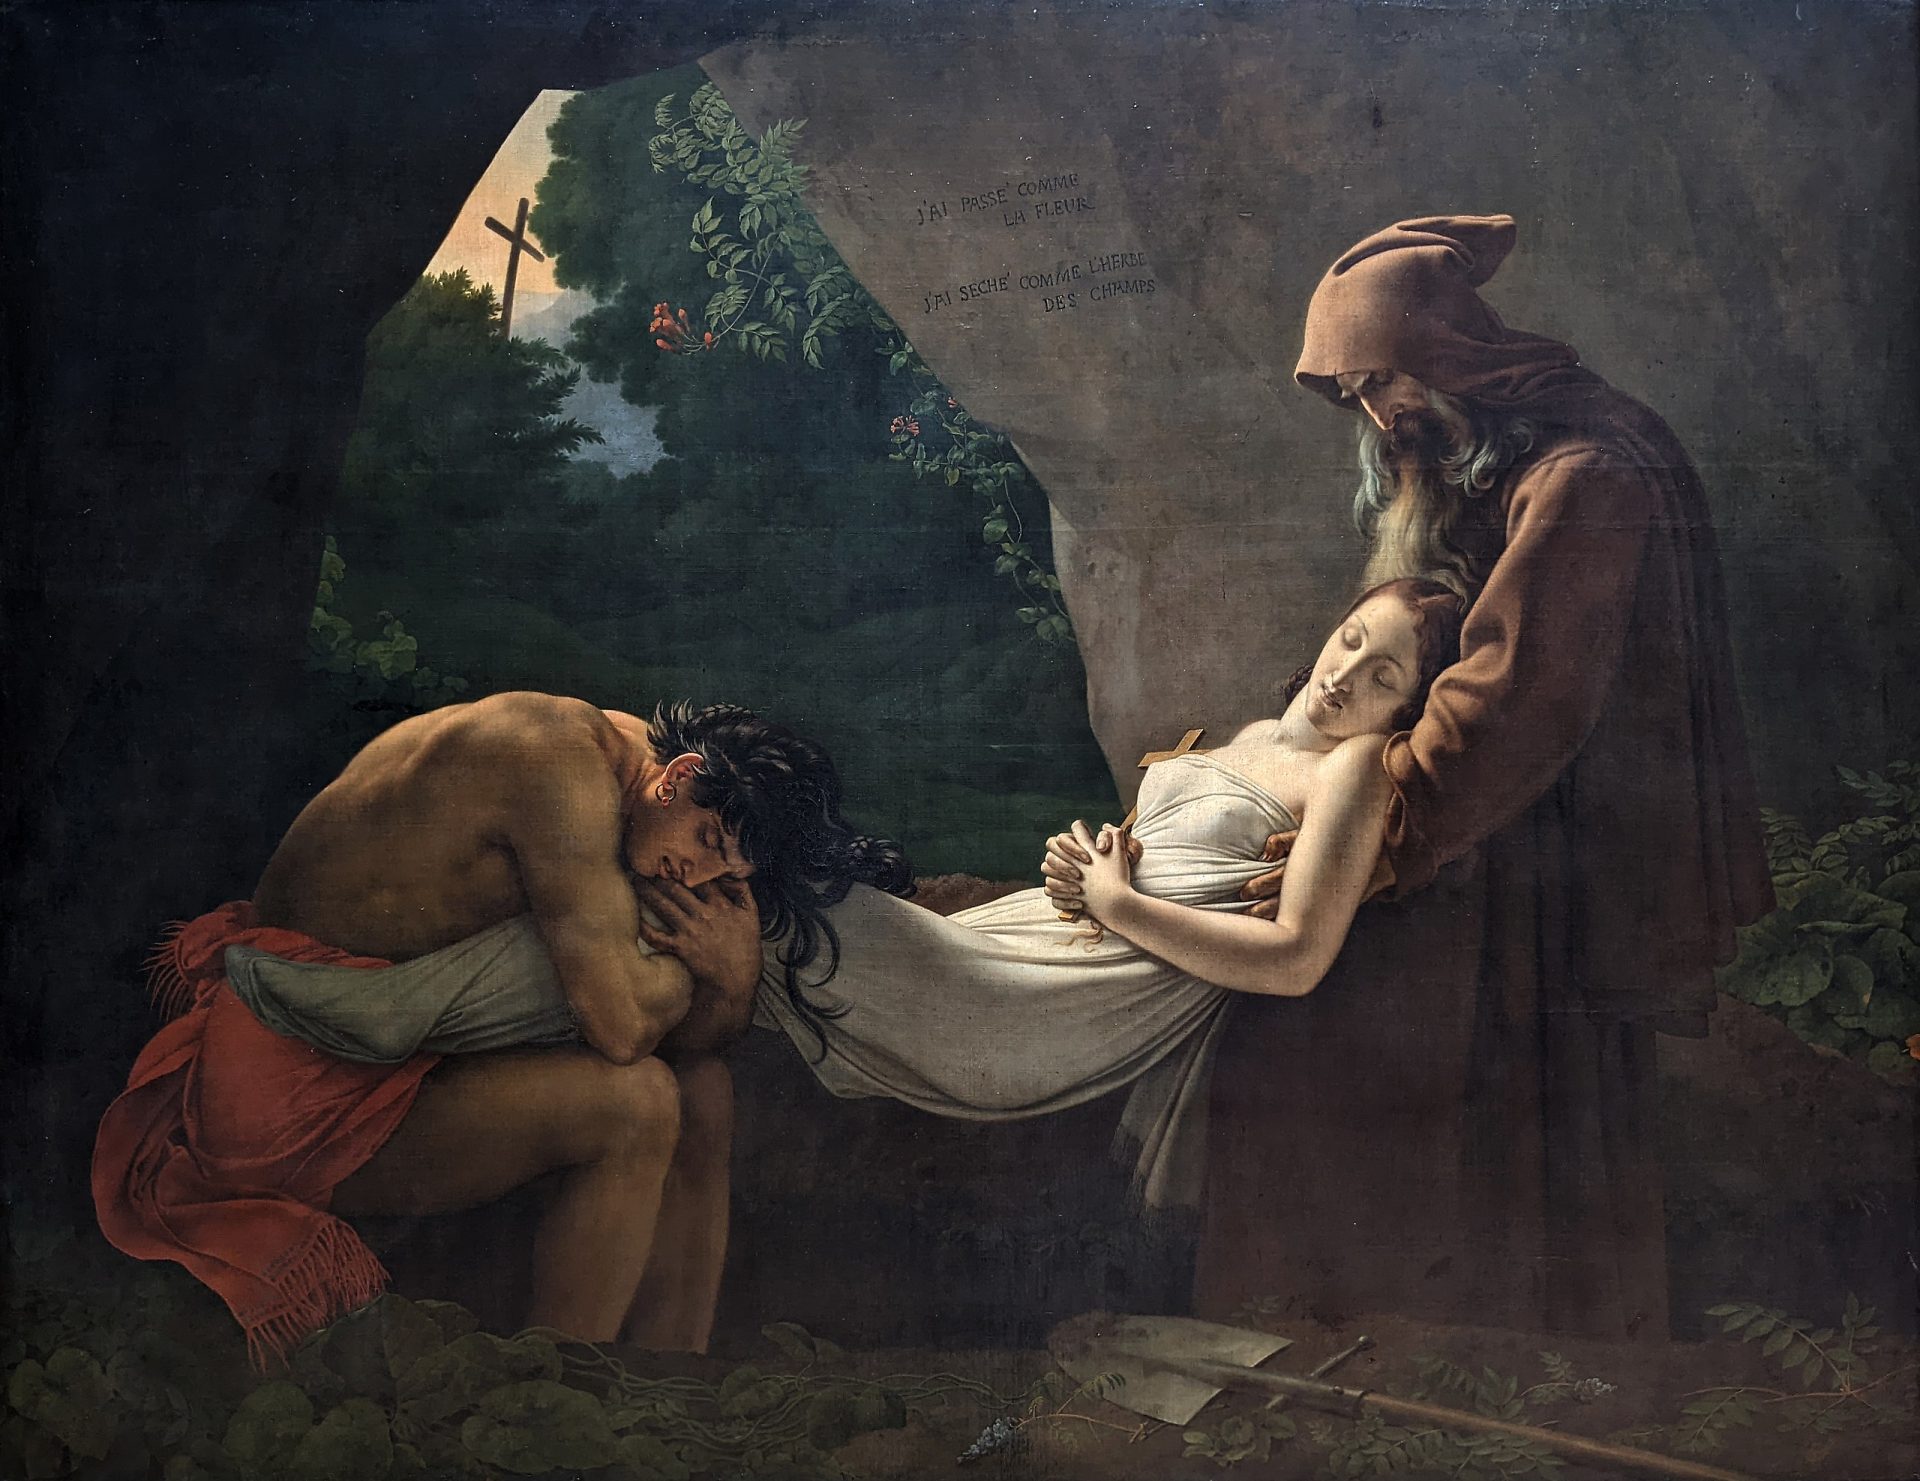 A painting of a young woman being buried in a cave with a young man hugging her legs.